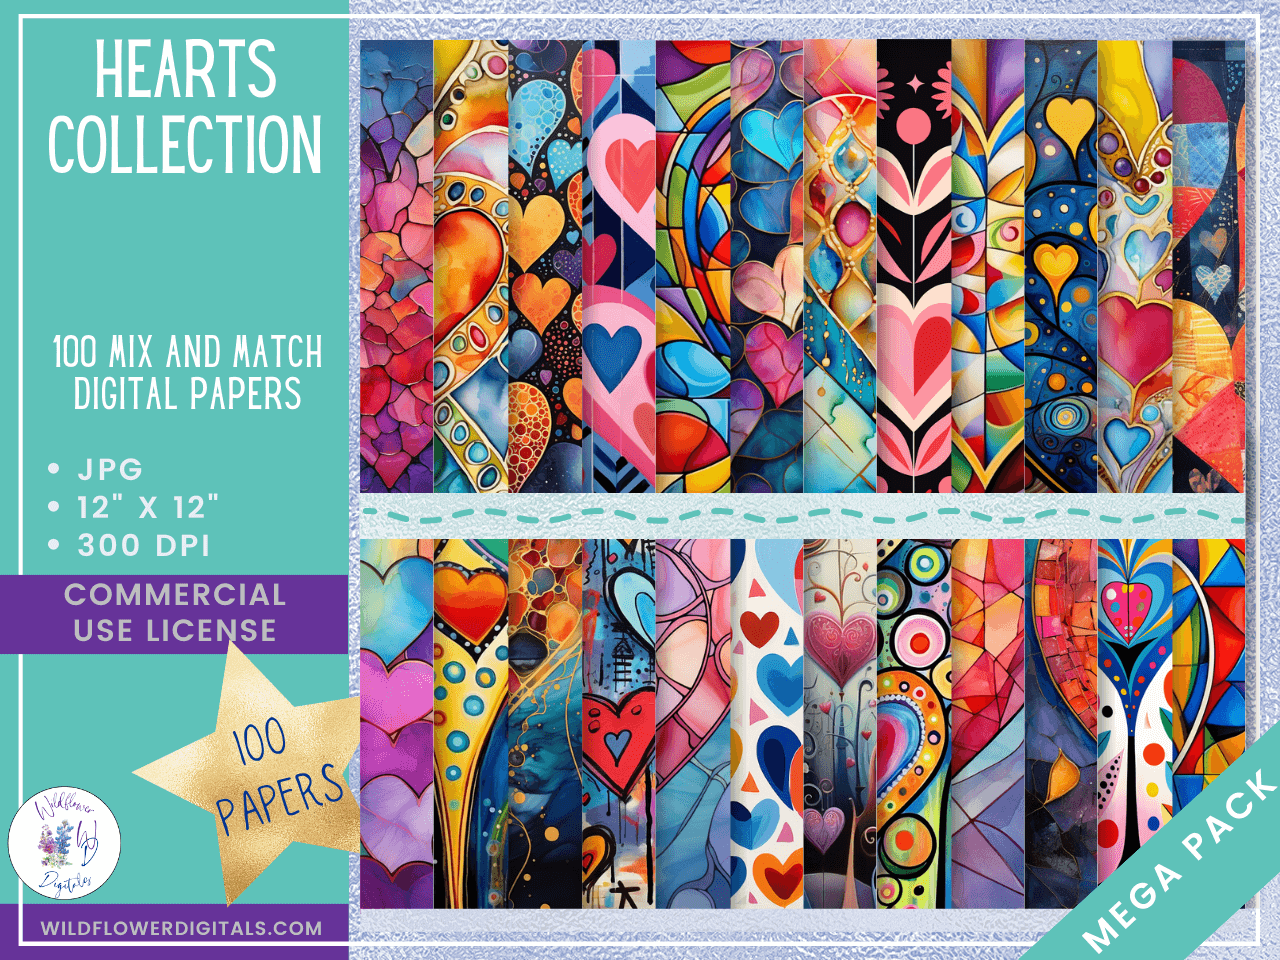 mockup of hearts collection bundle digital papers covers frames mix and match papers